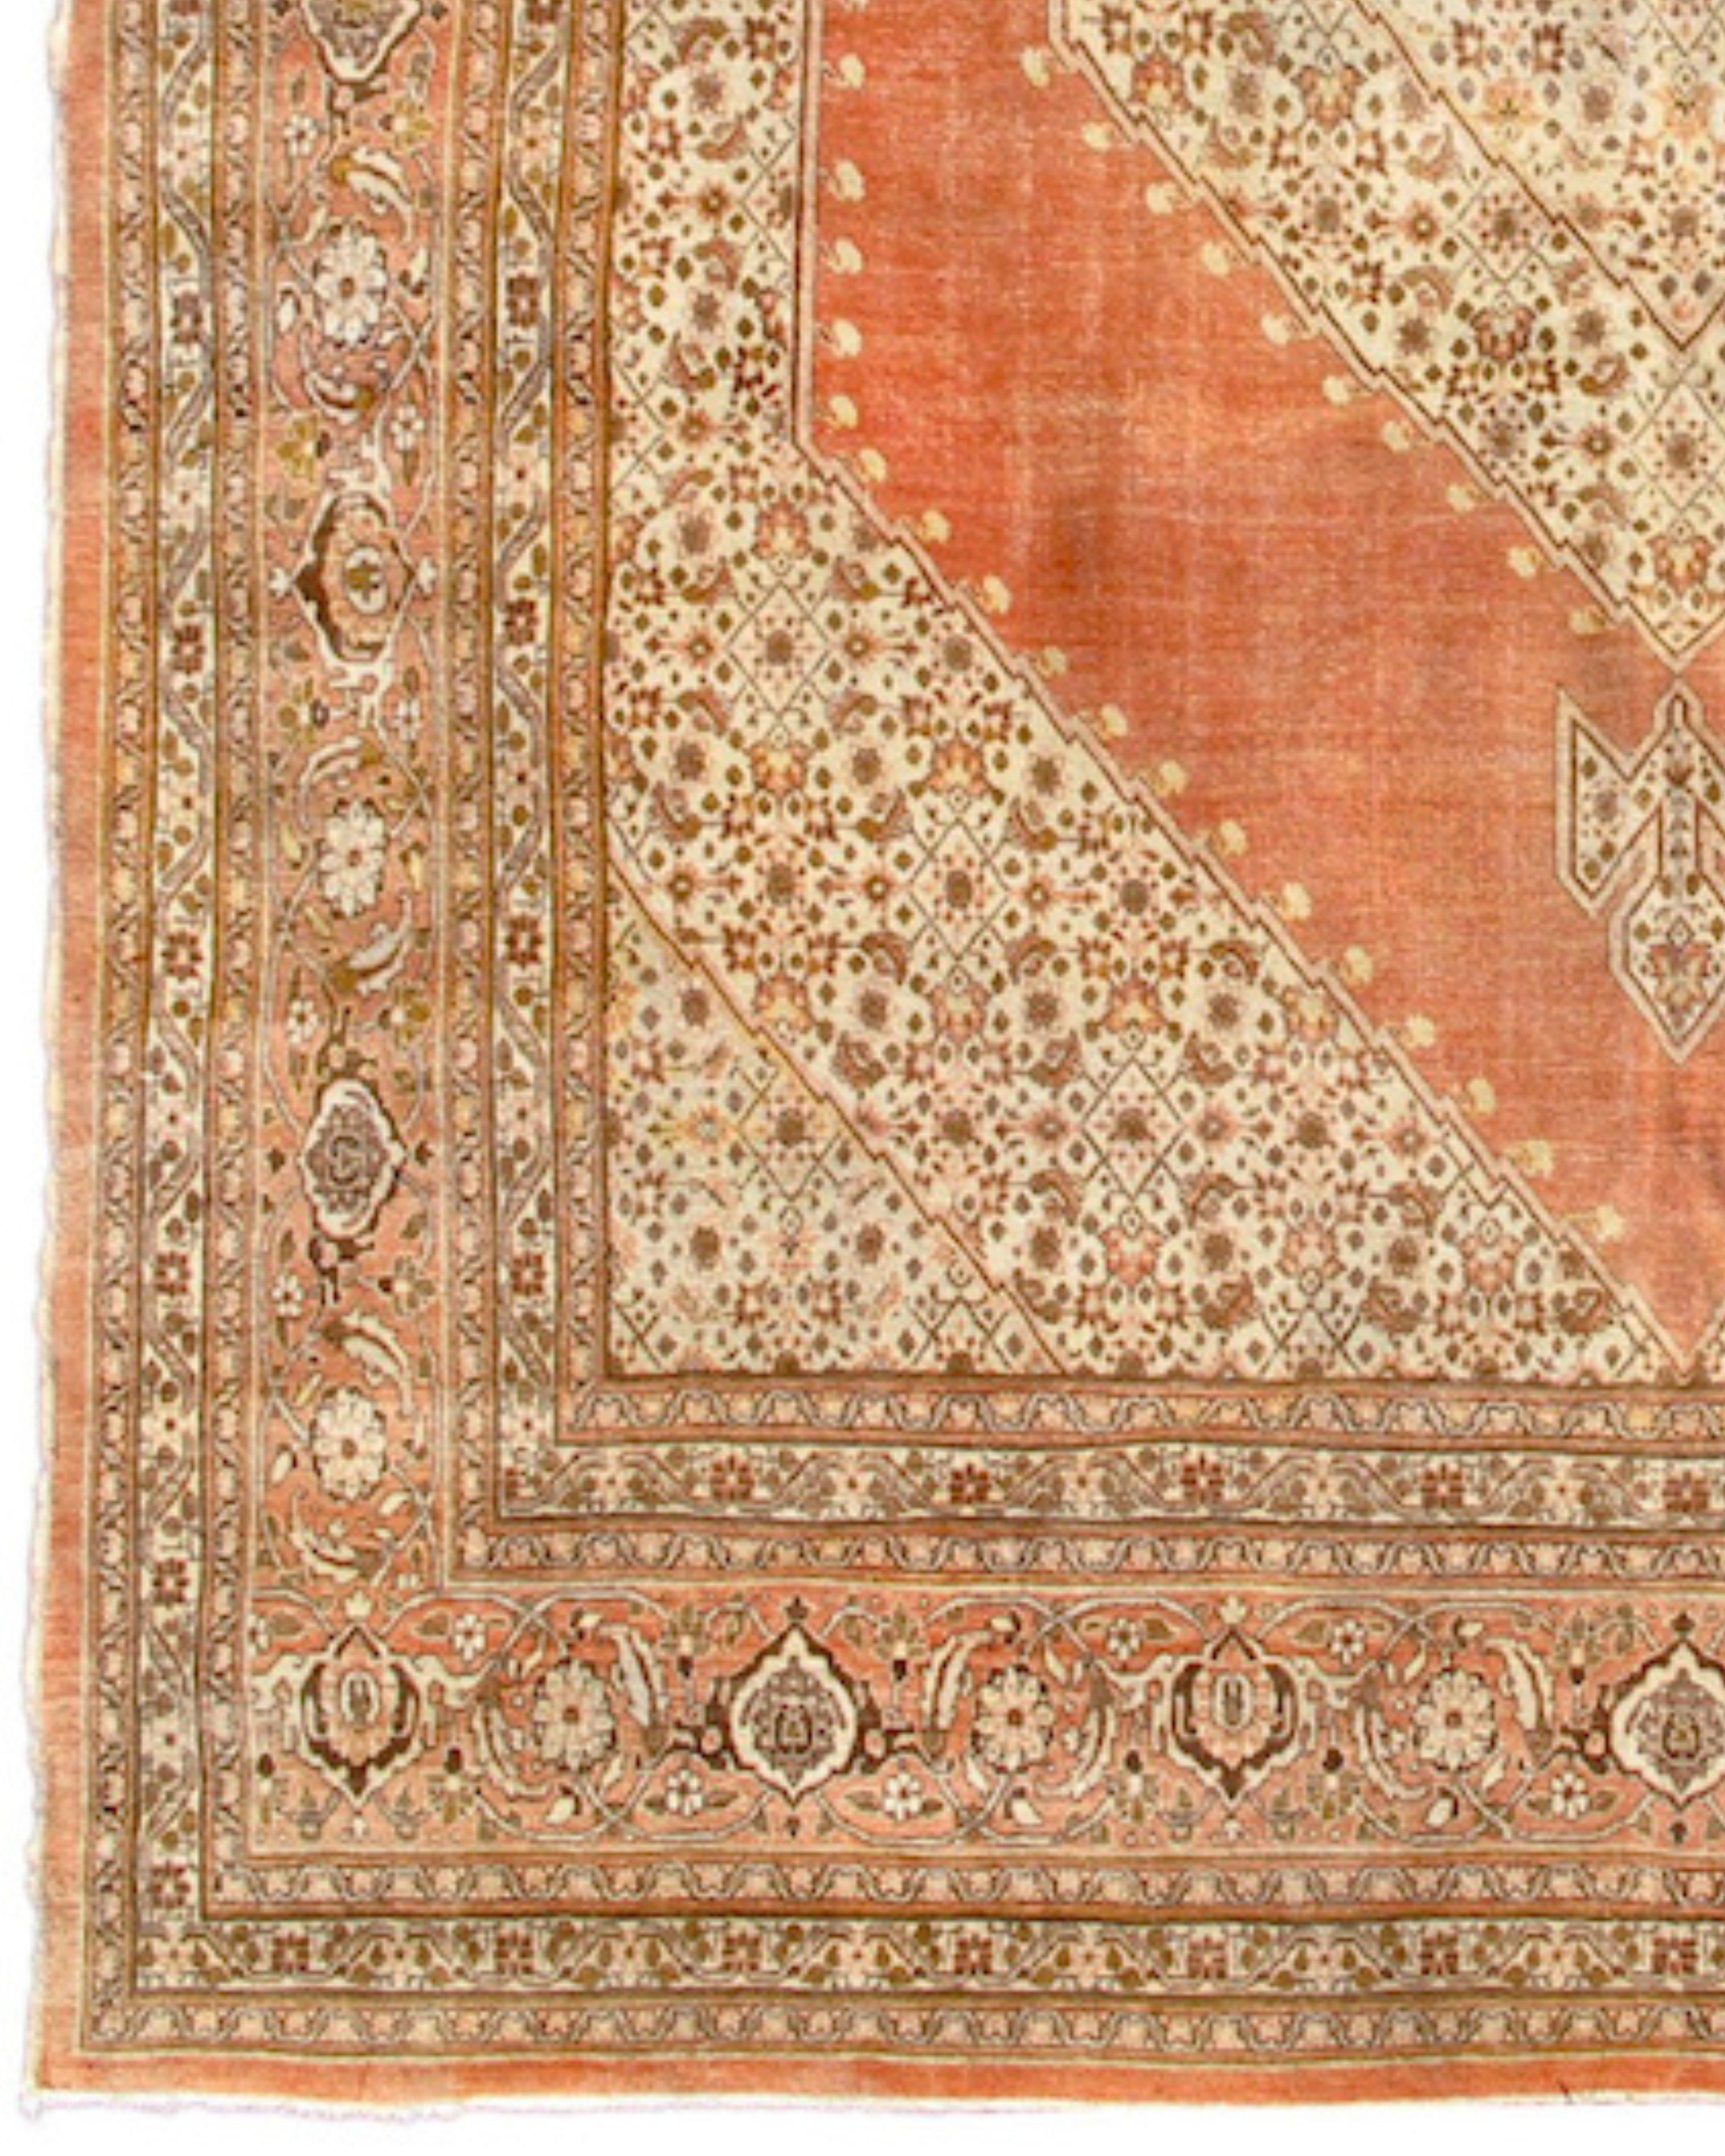 Hand-Woven Antique Persian Tabriz Rug, c. 1900 For Sale